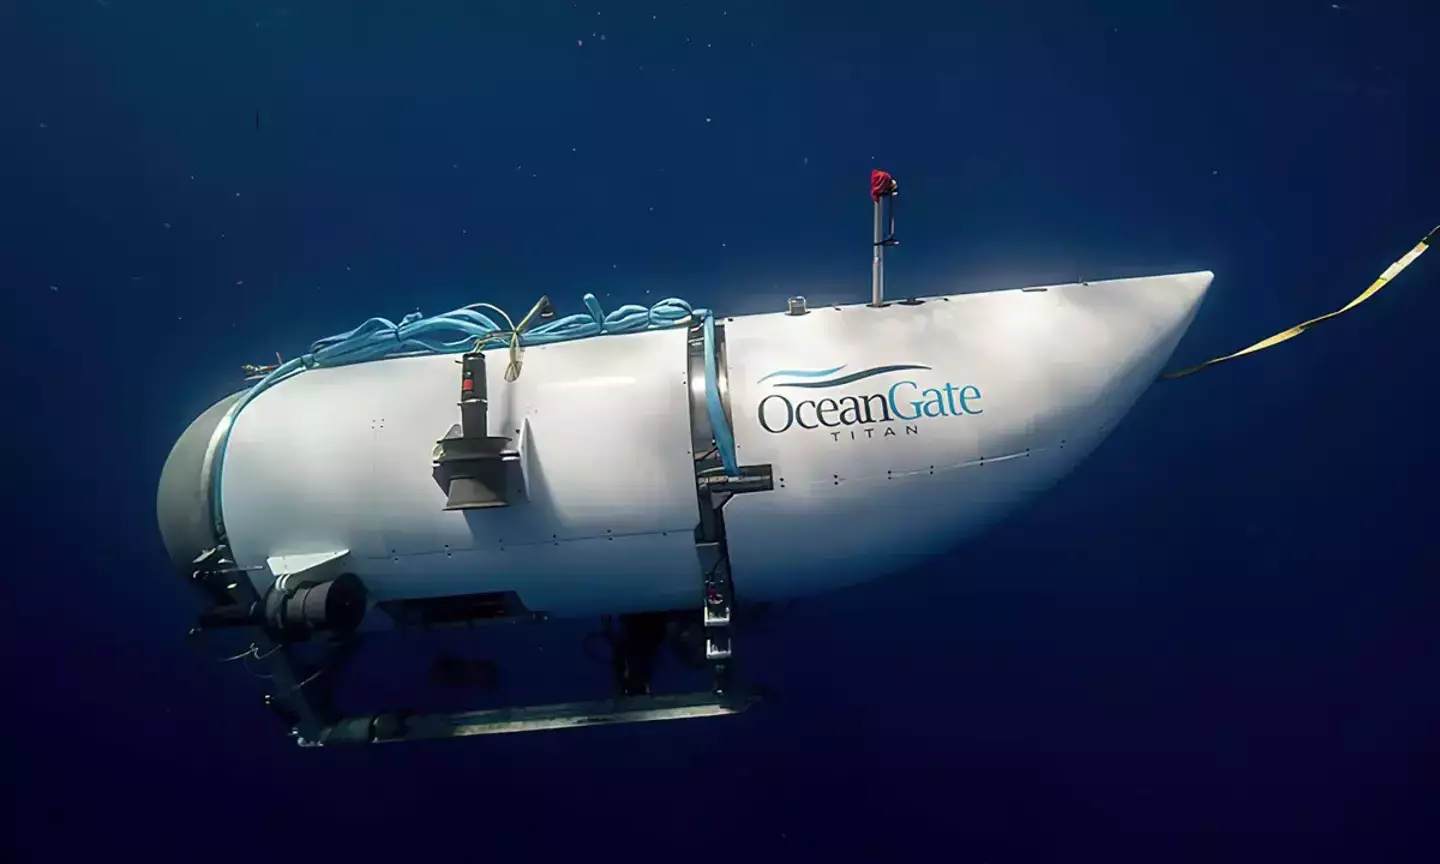 The 'transcript' from the submersible was found to be fake. (OceanGate/Becky Kagan Schott)